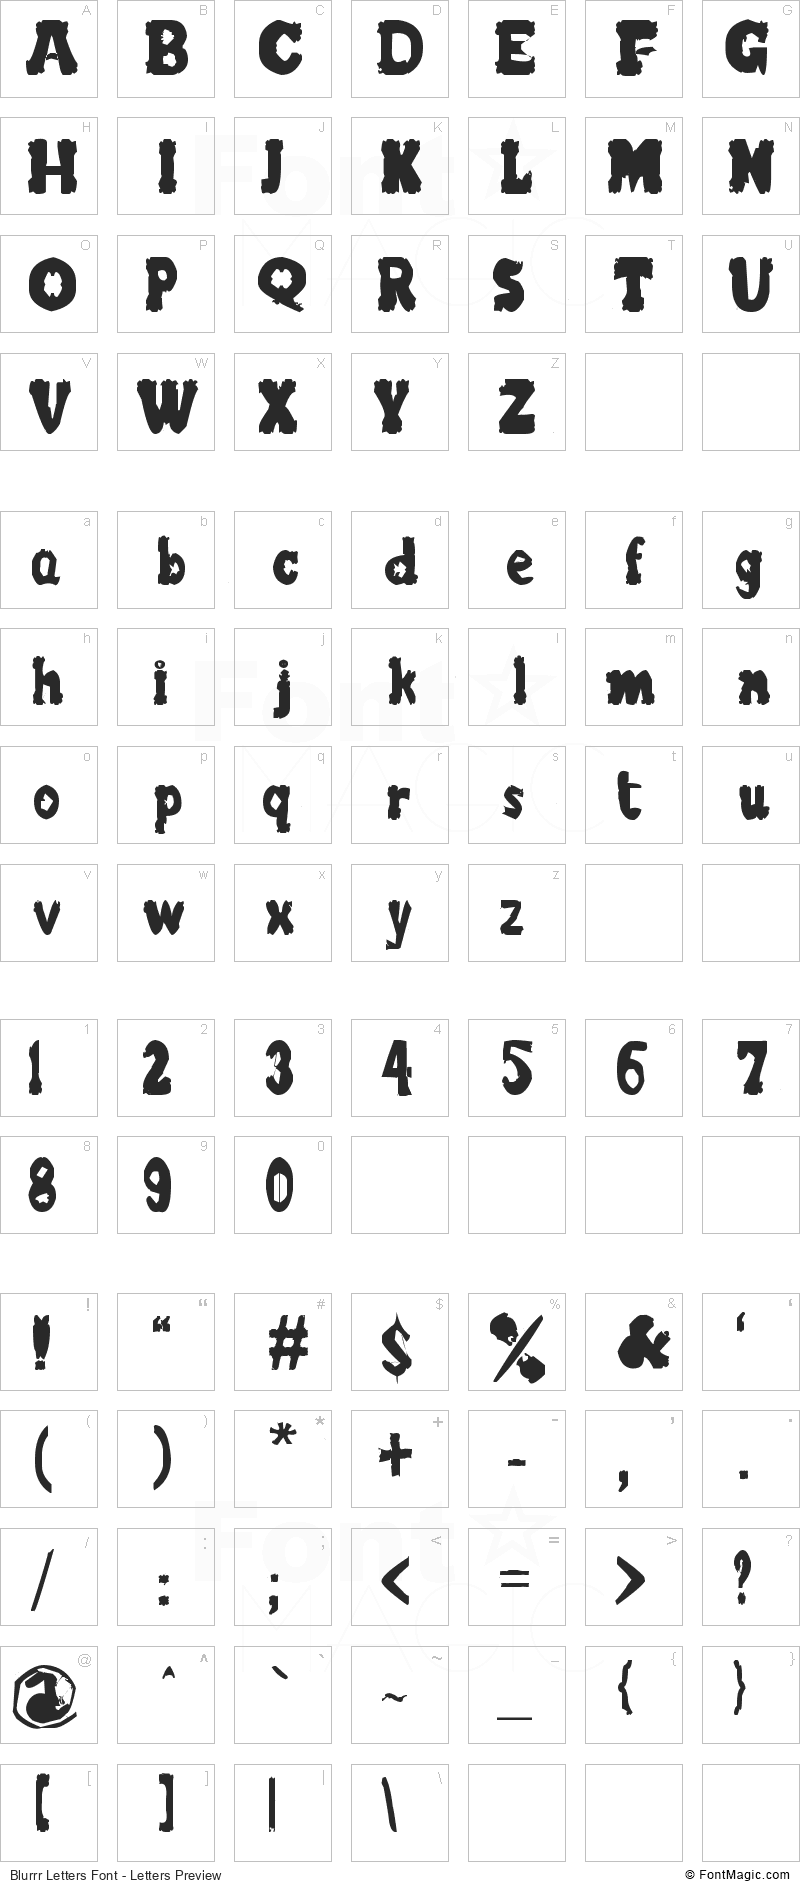 Blurrr Letters Font - All Latters Preview Chart